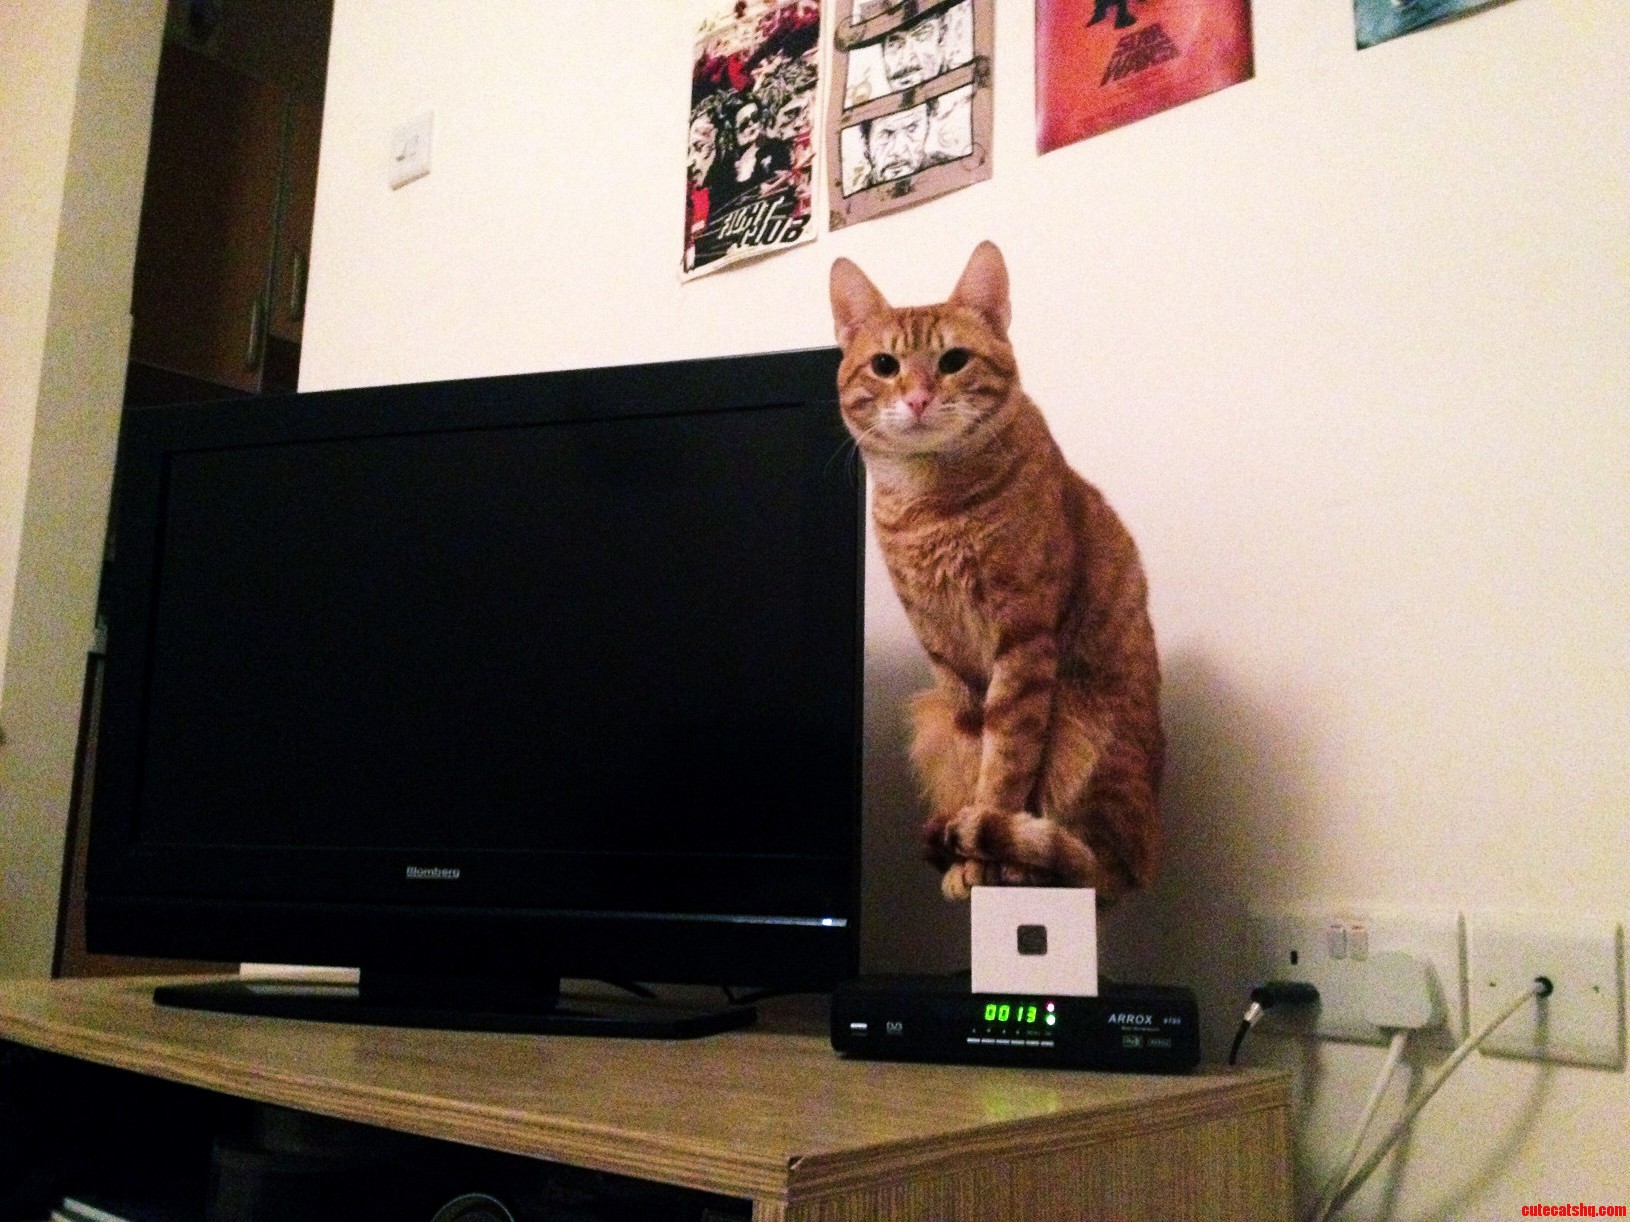 So I Put A Box There To Avoid Him Sitting On Top Of The Decoder..